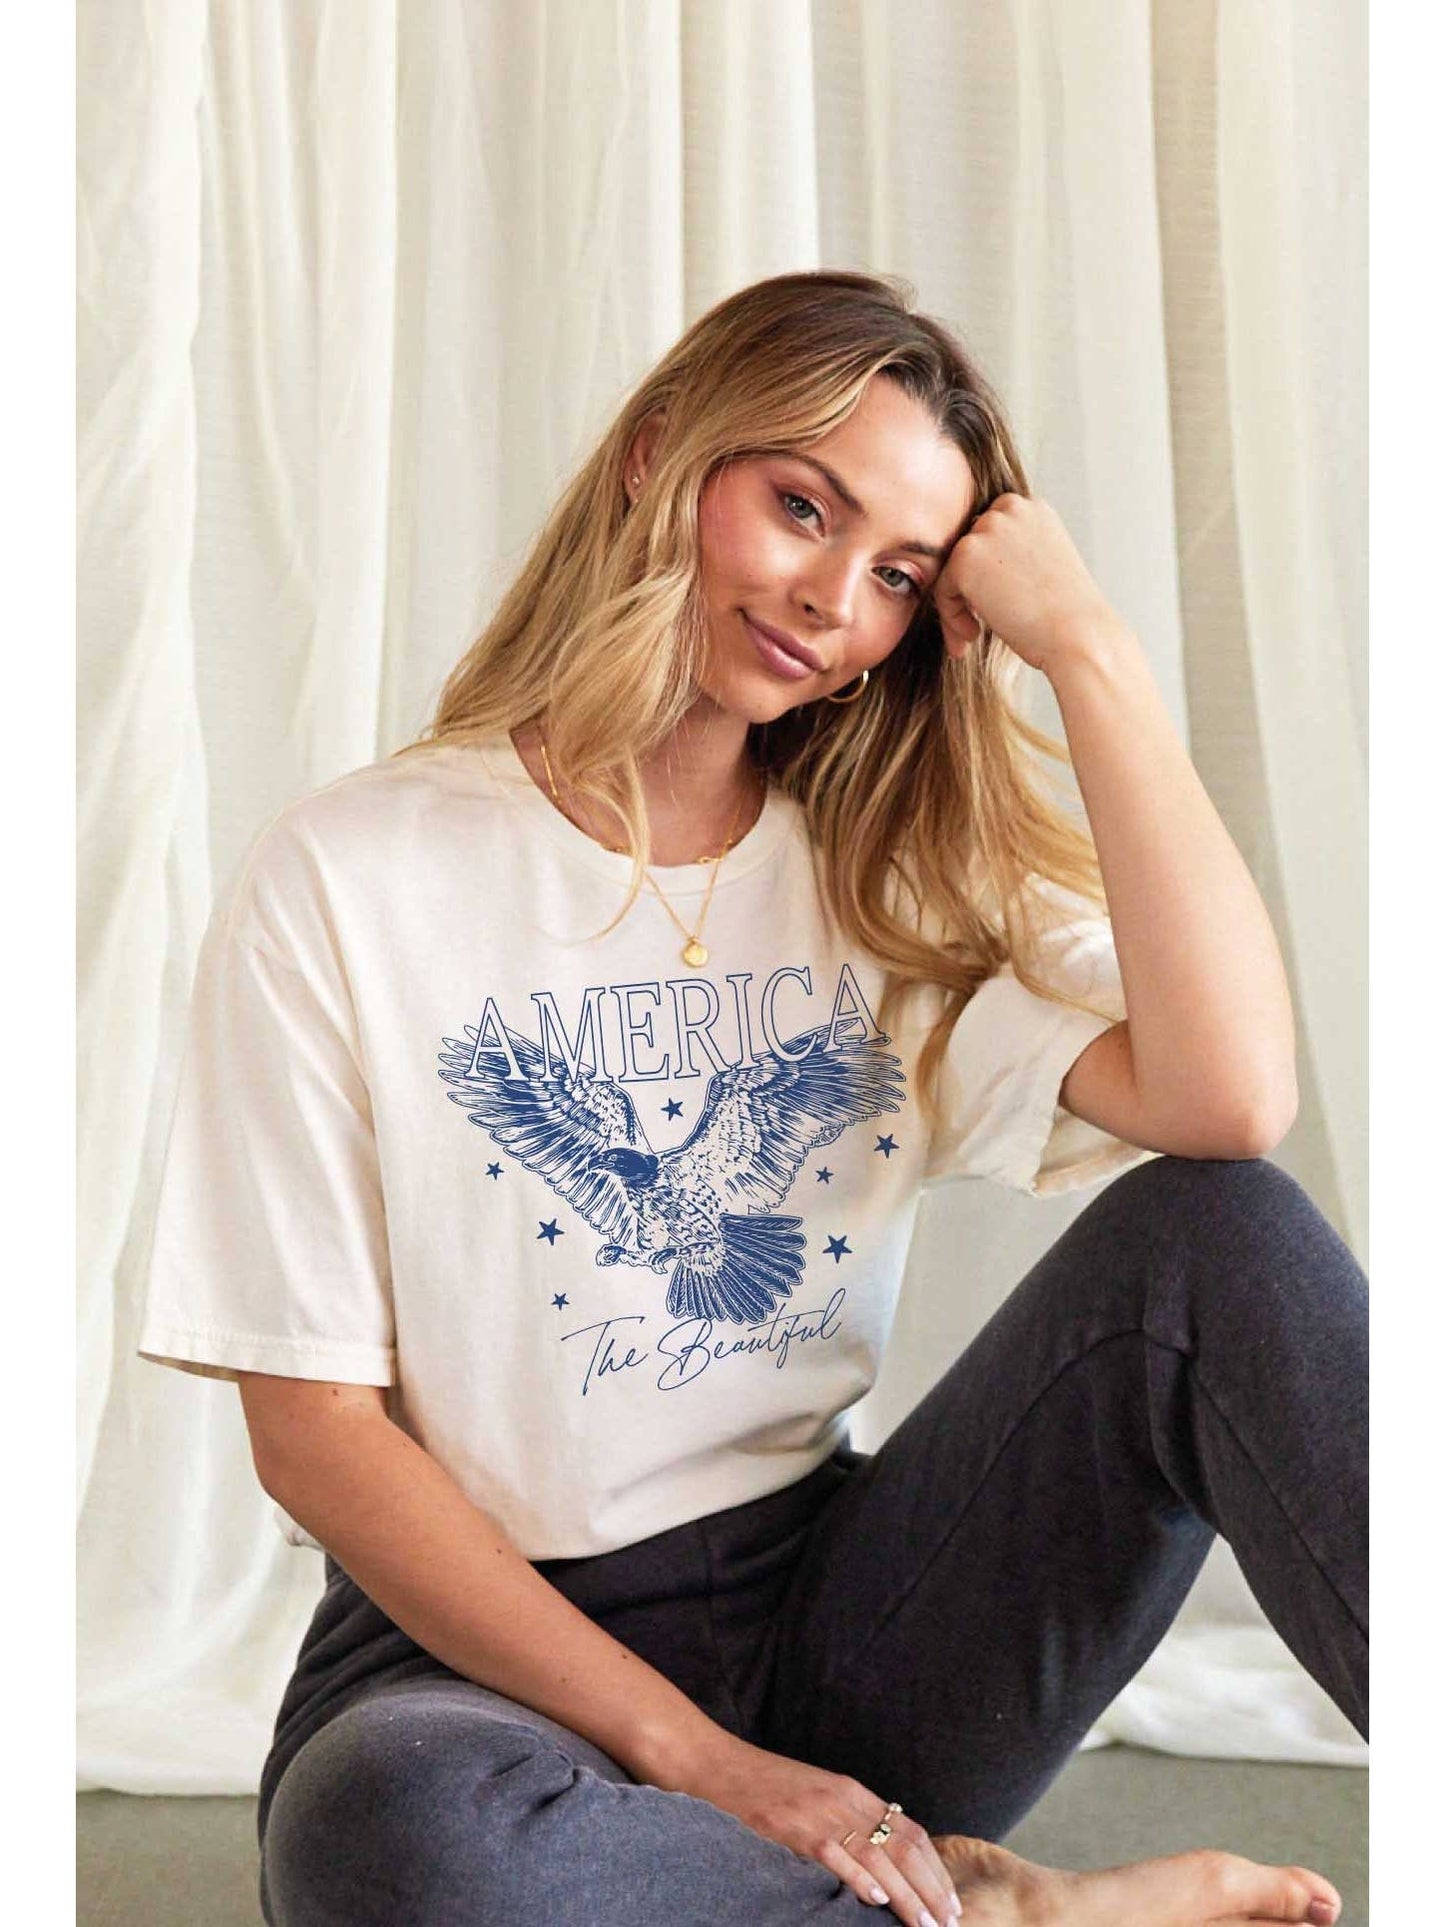 AMERICA THE BEAUTIFUL Tee - Favorite Little Things Co